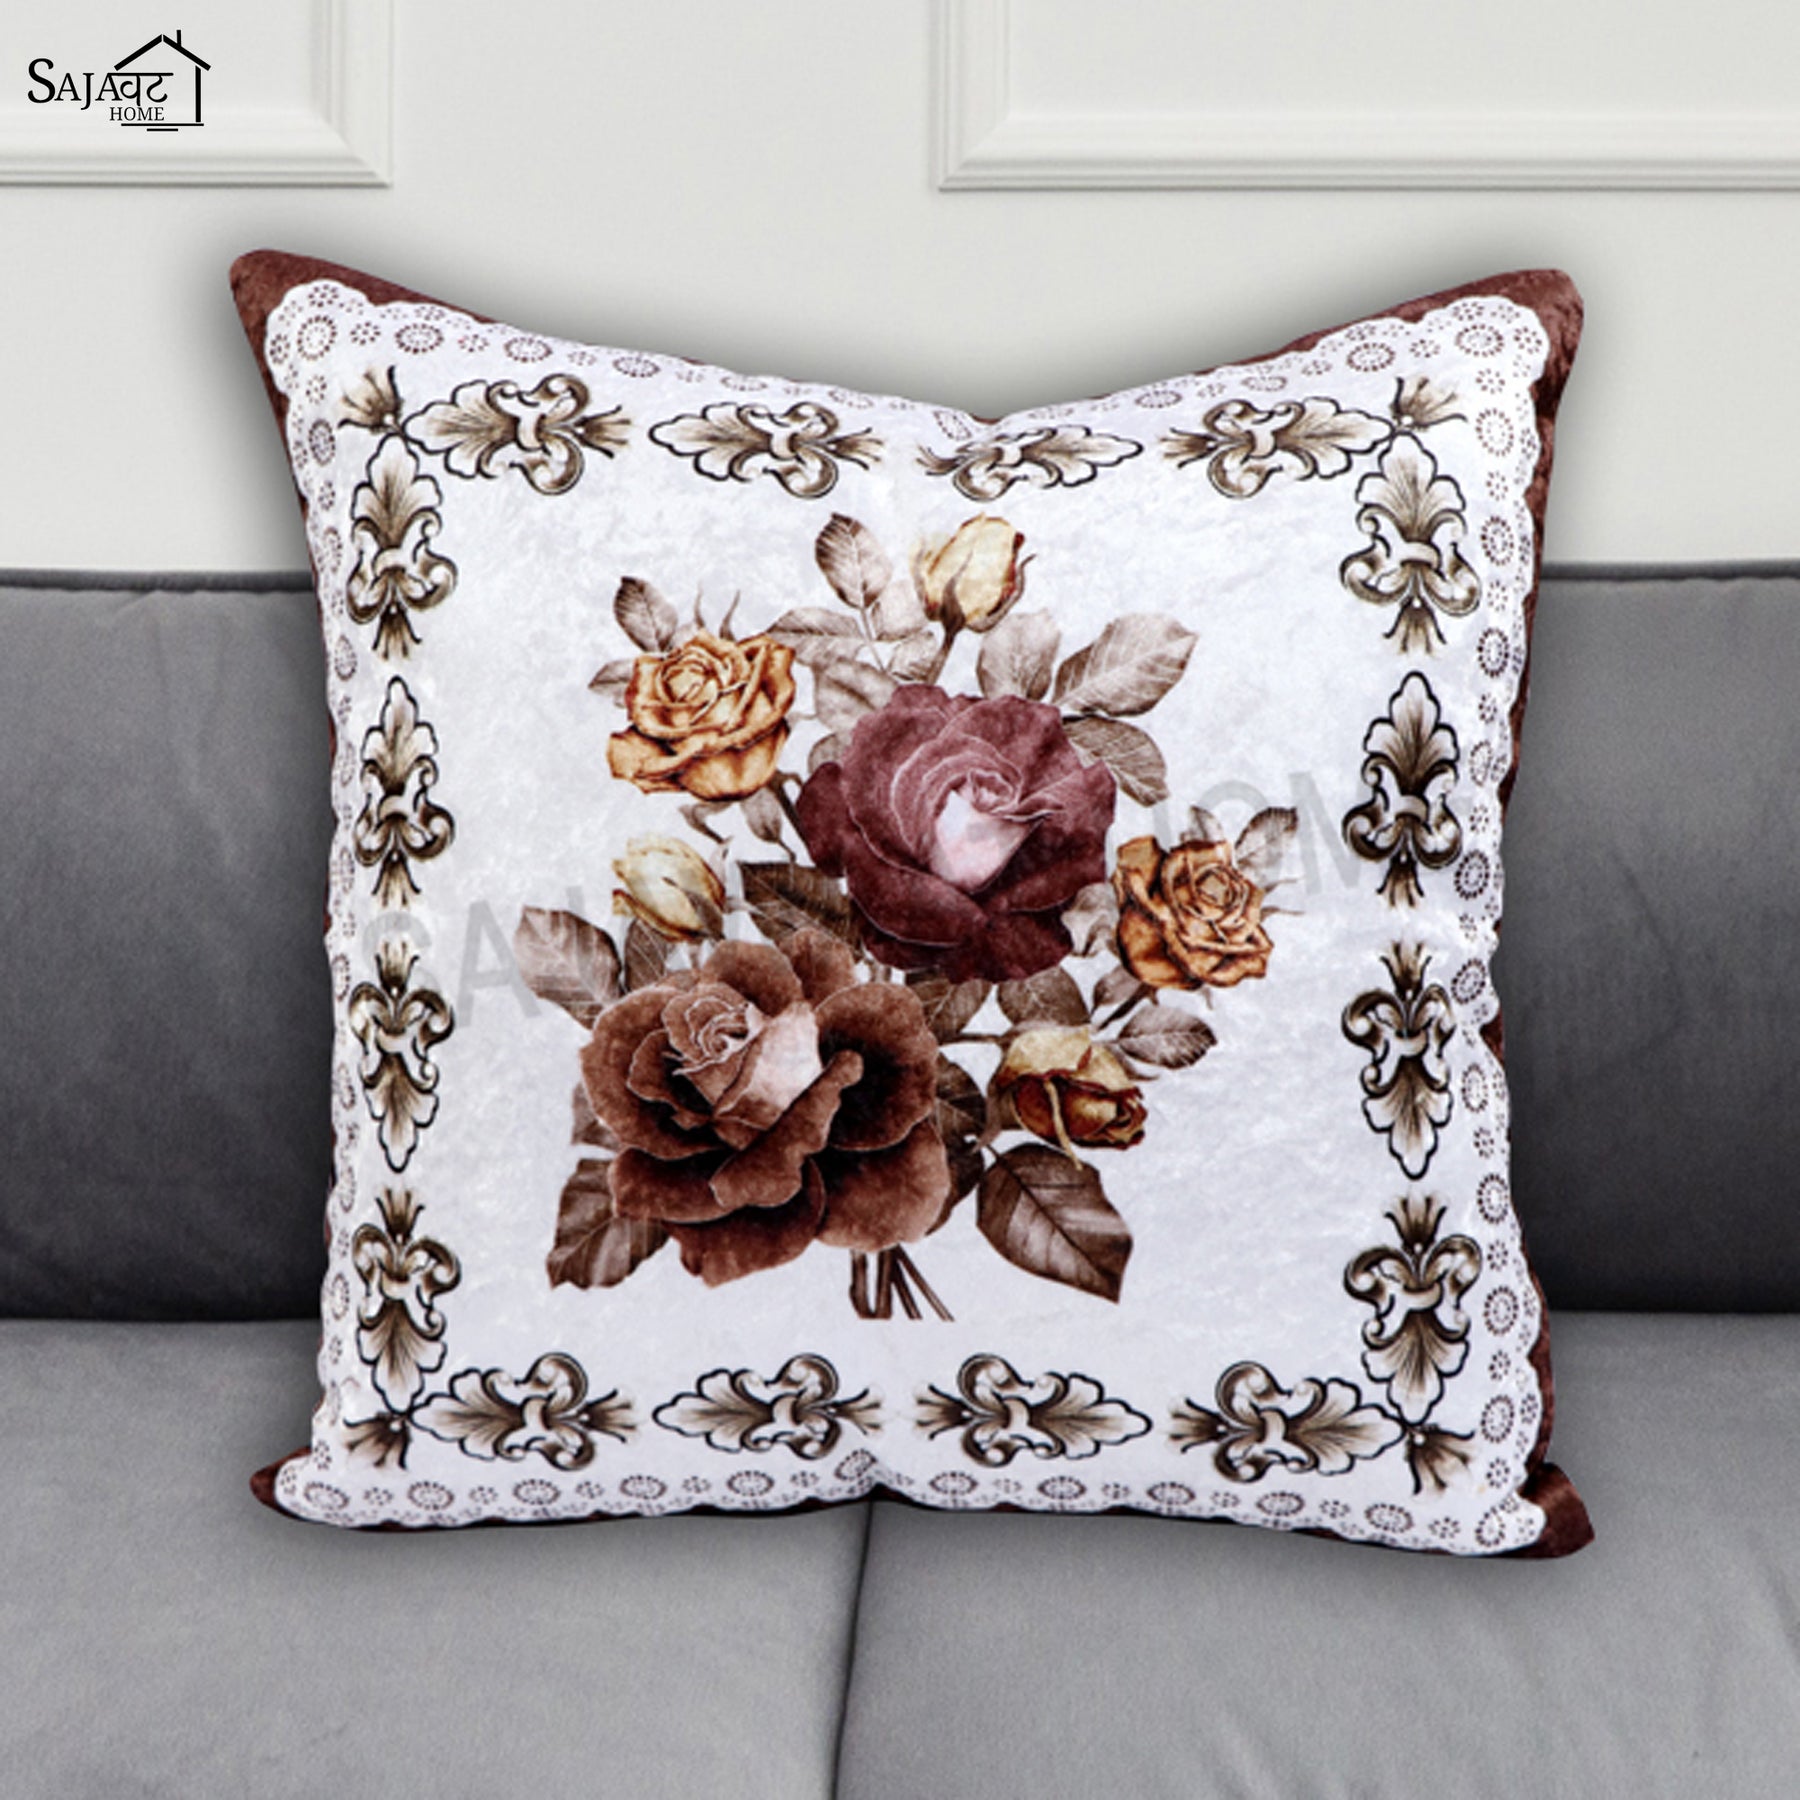 Buy Boho Savannah Cushion Cover Online in India at Best Price